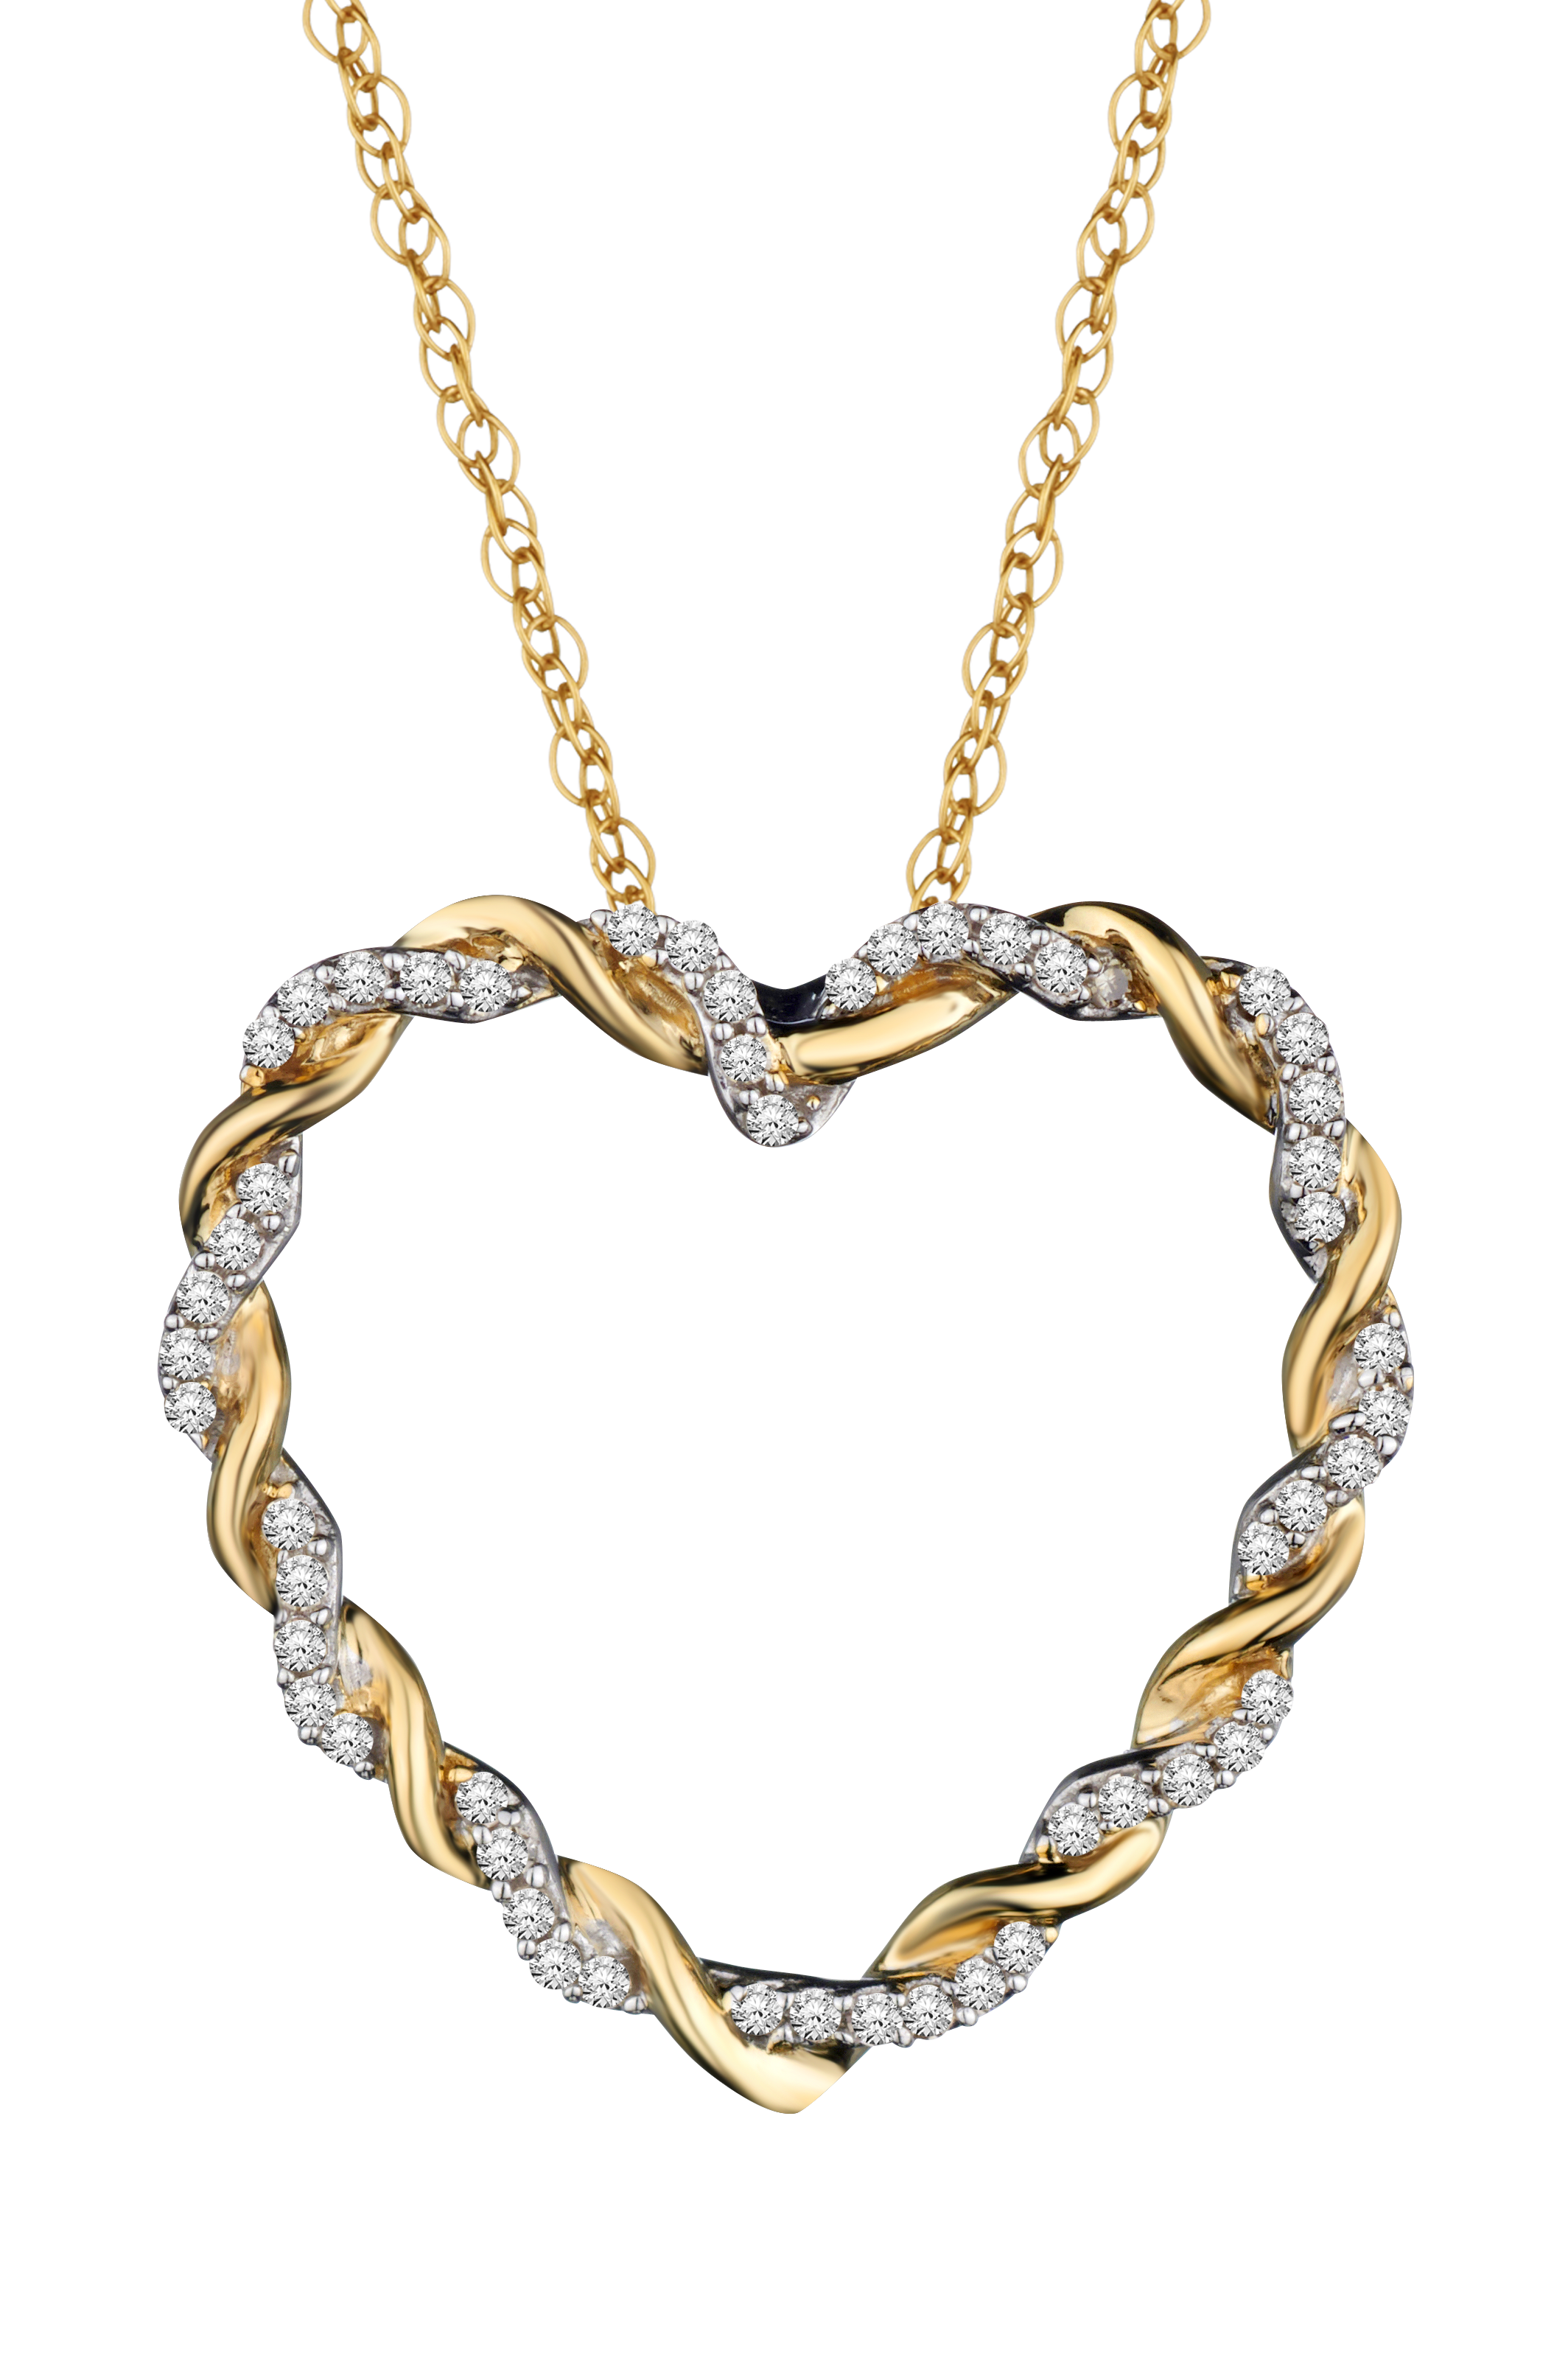 .14 Carat of Diamonds "Entwined" Heart pendant, 10kt Two Tone.....................NOW